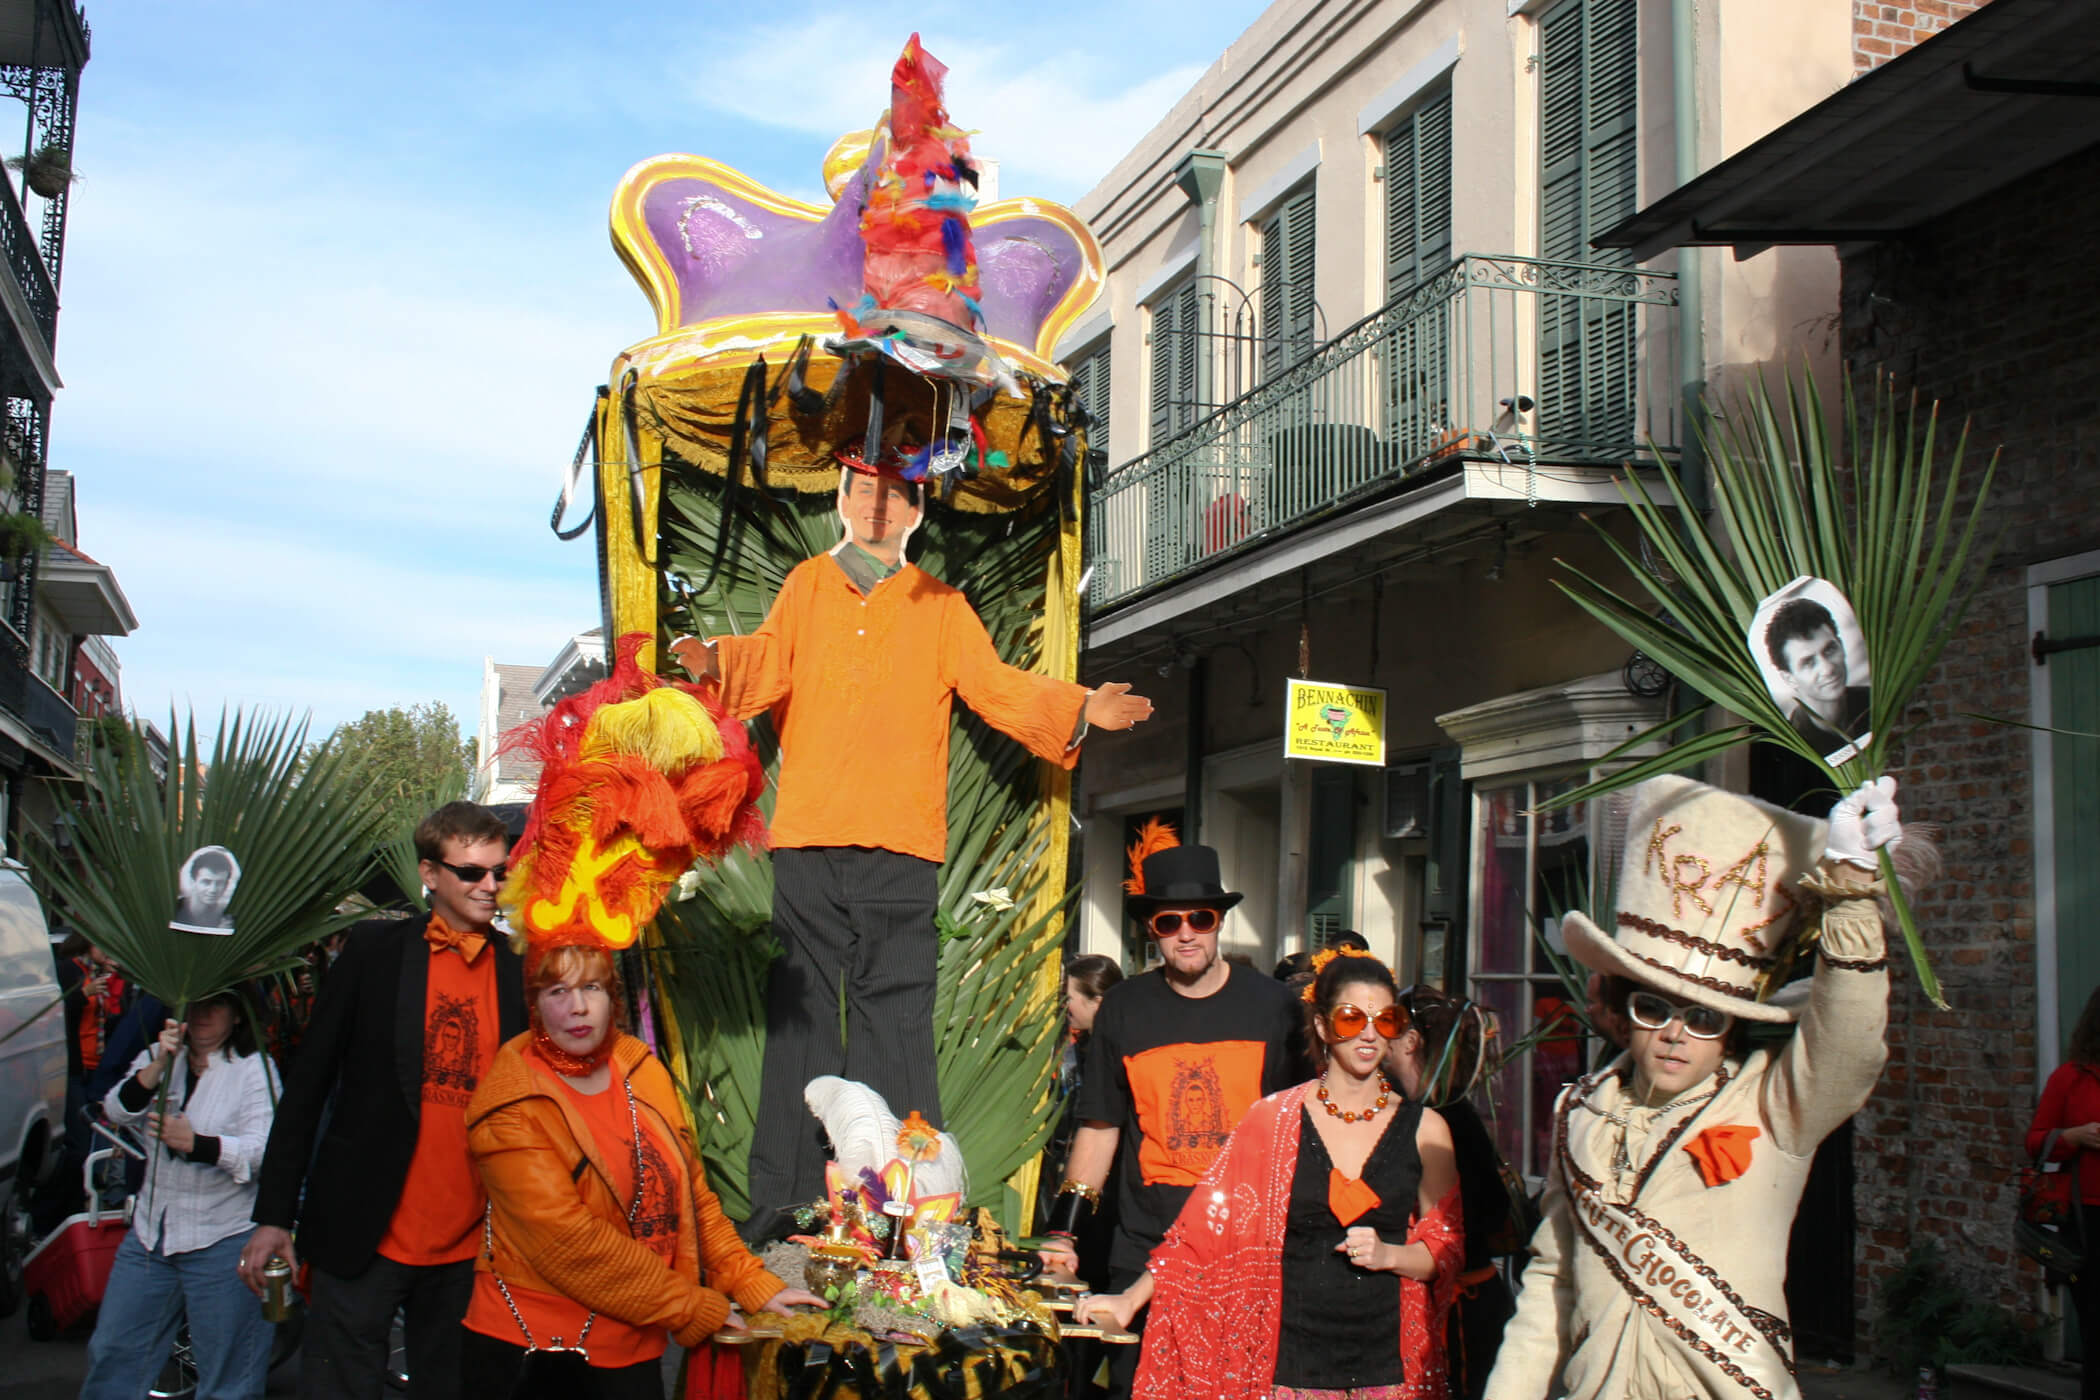 Still from My Louisiana Love. A few people wearing hats carry a parade float down a street.